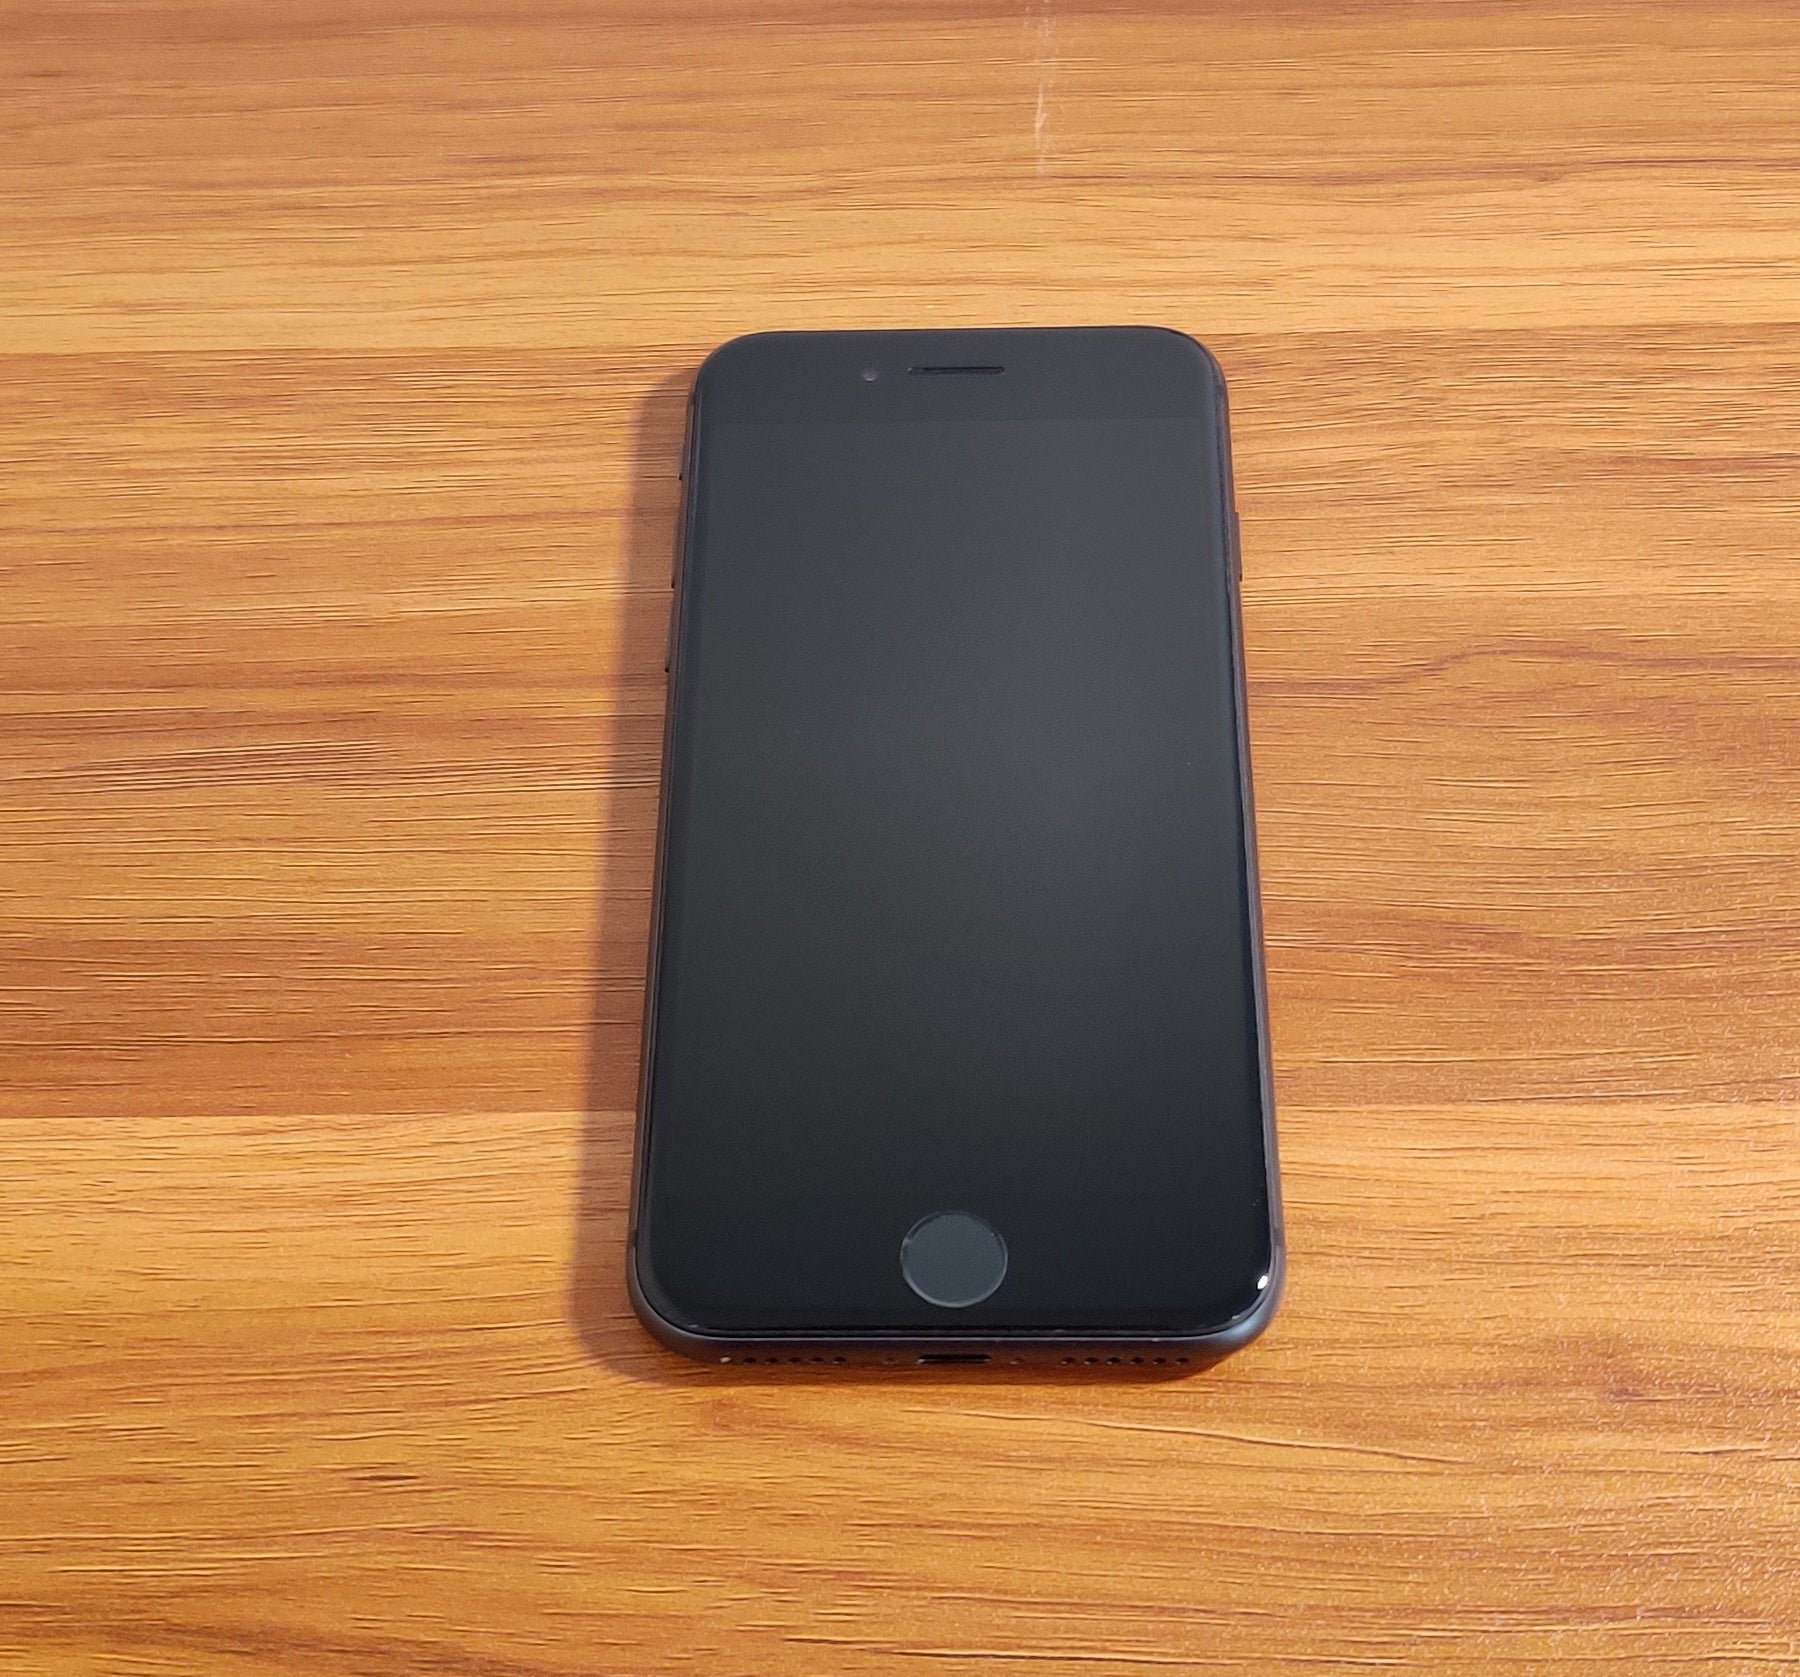 iPhone 8 64gb Space gray – Jay's Resales